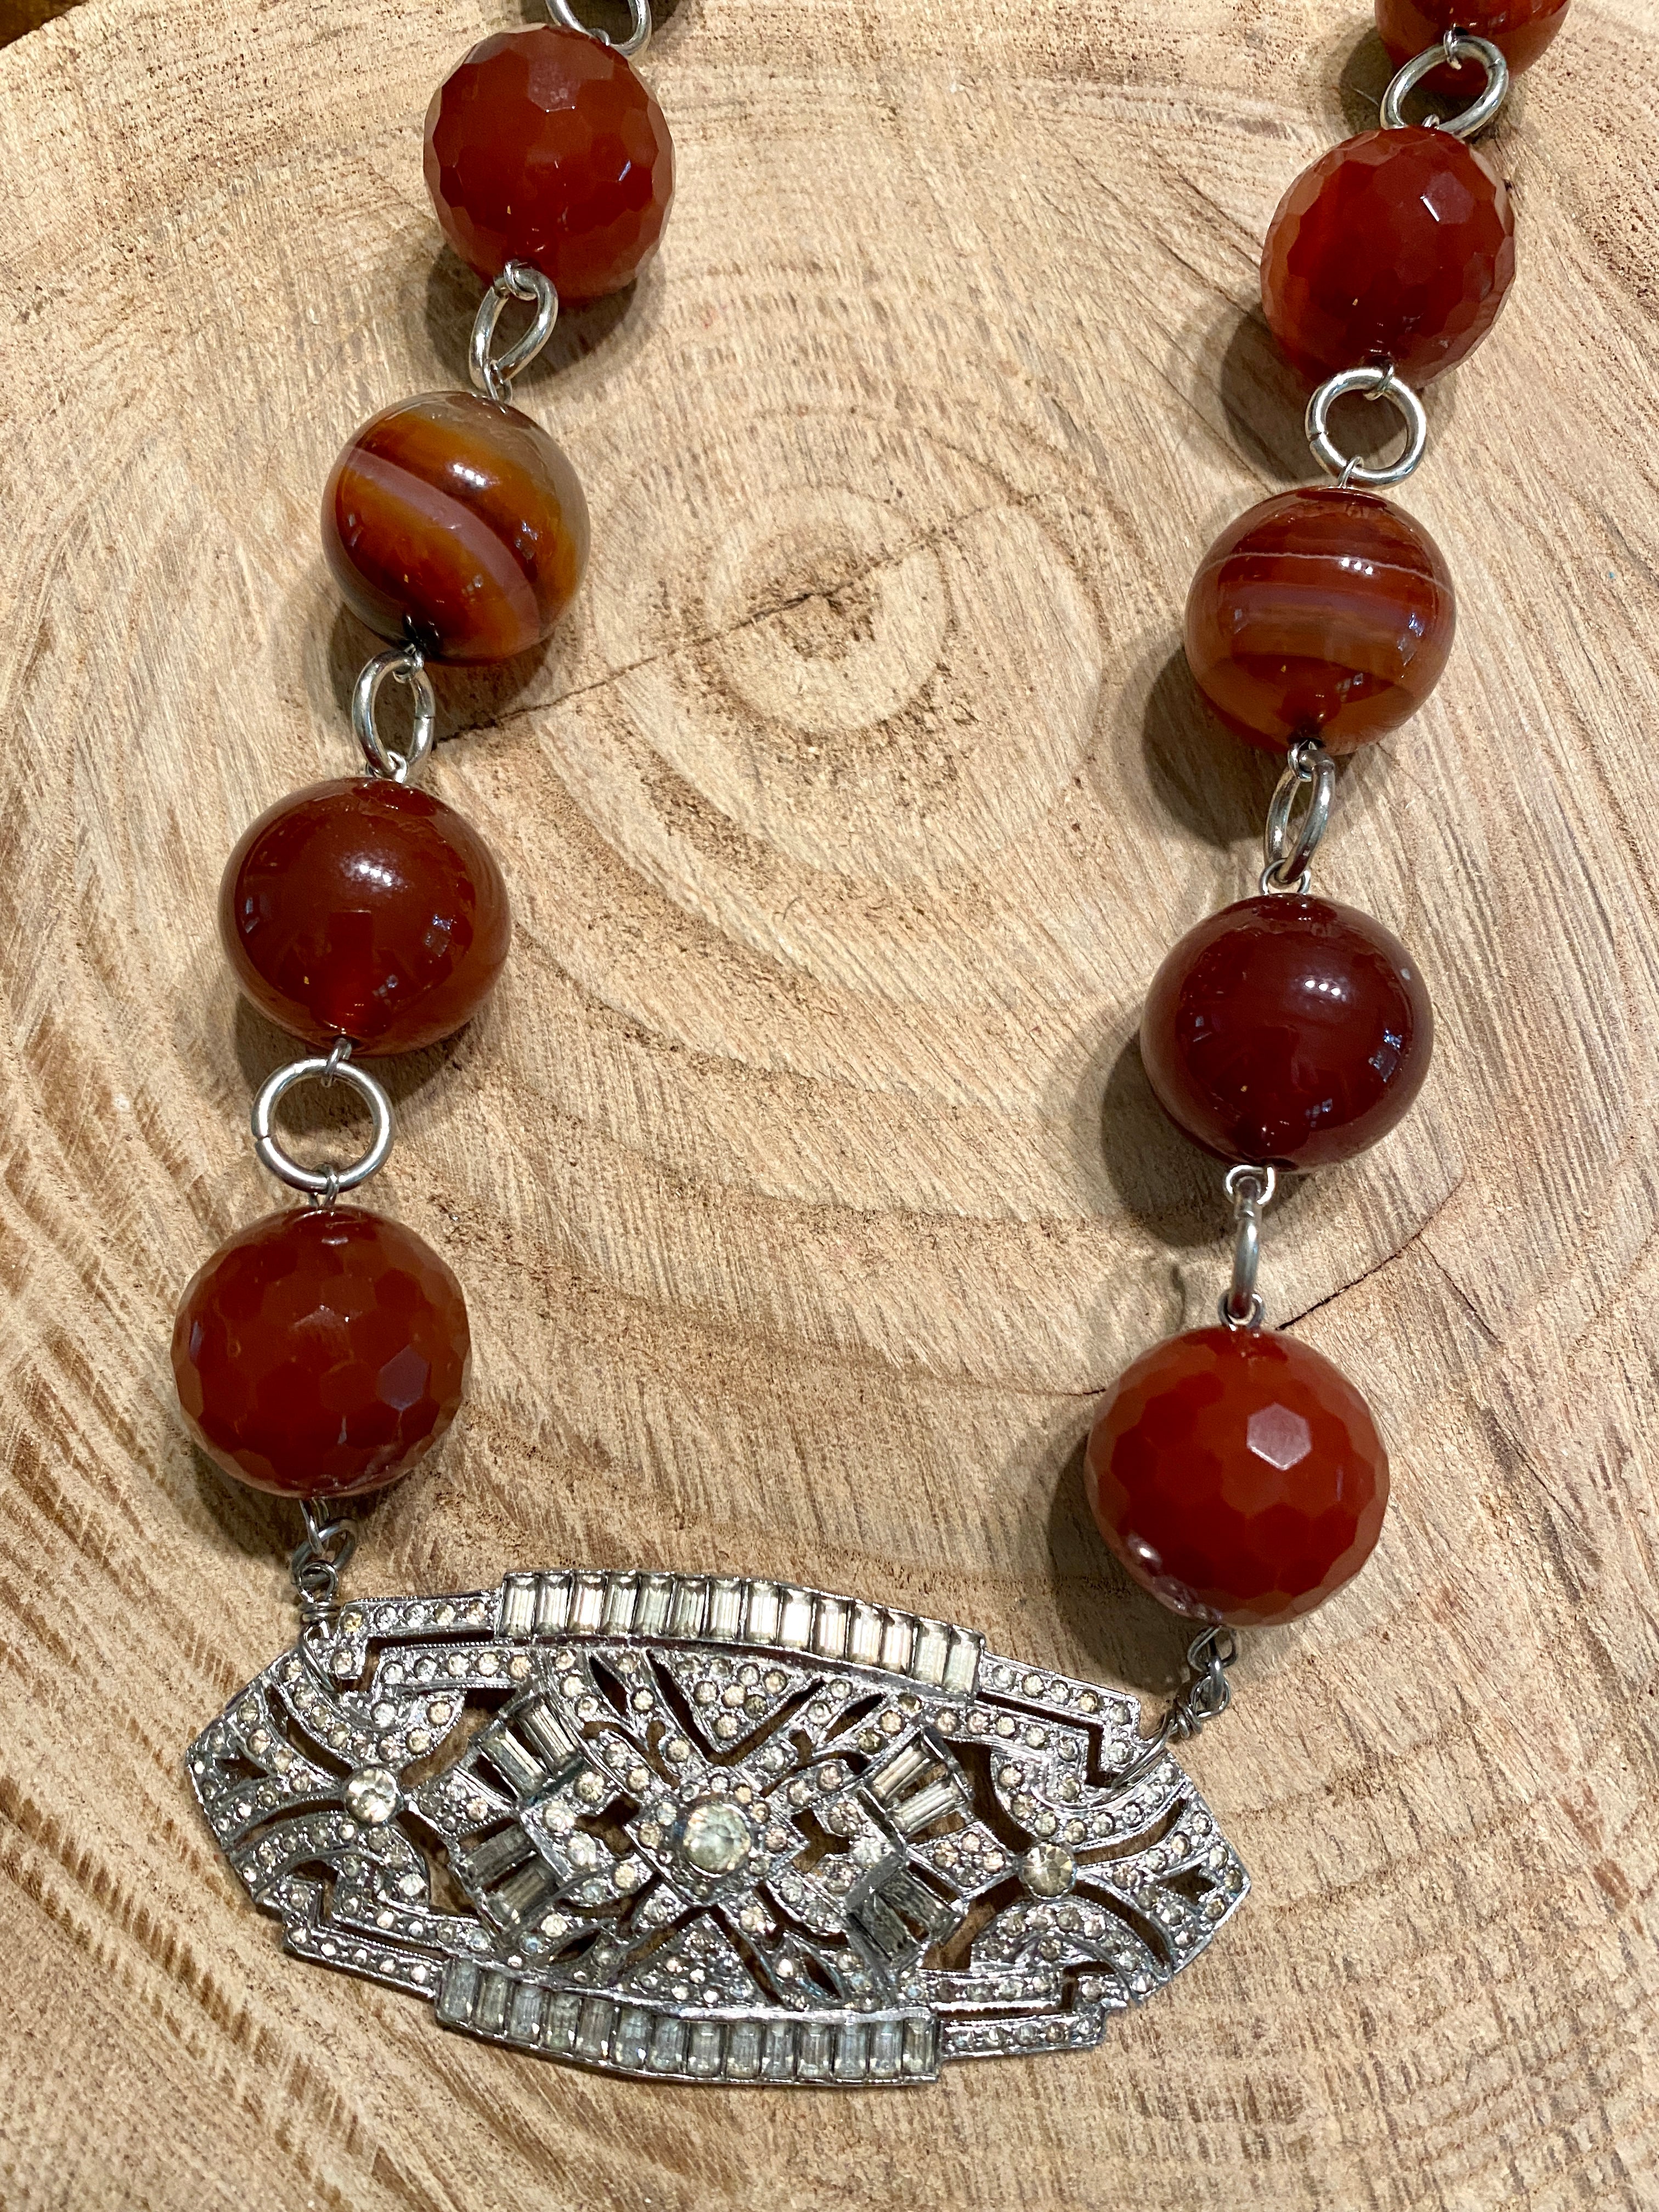 Awesome Agate Necklace